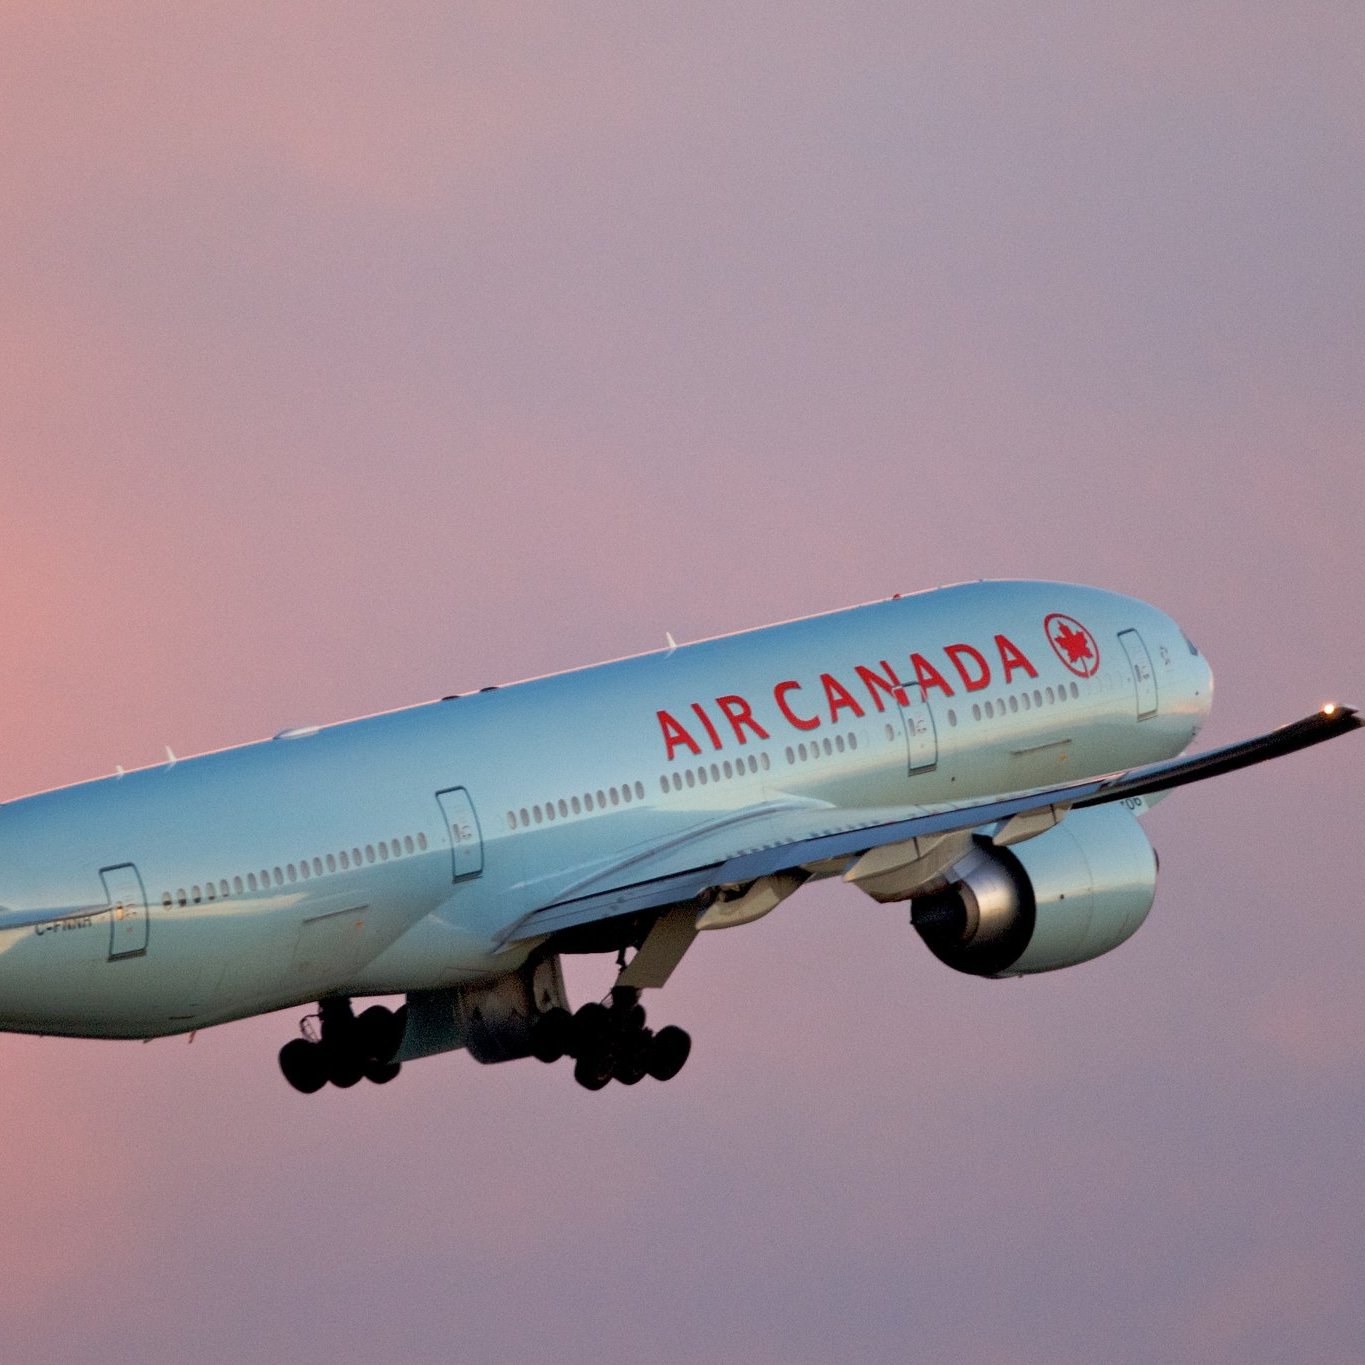 We Offer Cheap AirCanada Flight
 
In Canada, From Canada Or To Canada

DM FOR INQUIRY

LAST MINUTE BOOKING AVAILABLE 

Payments are made through BITCOINS